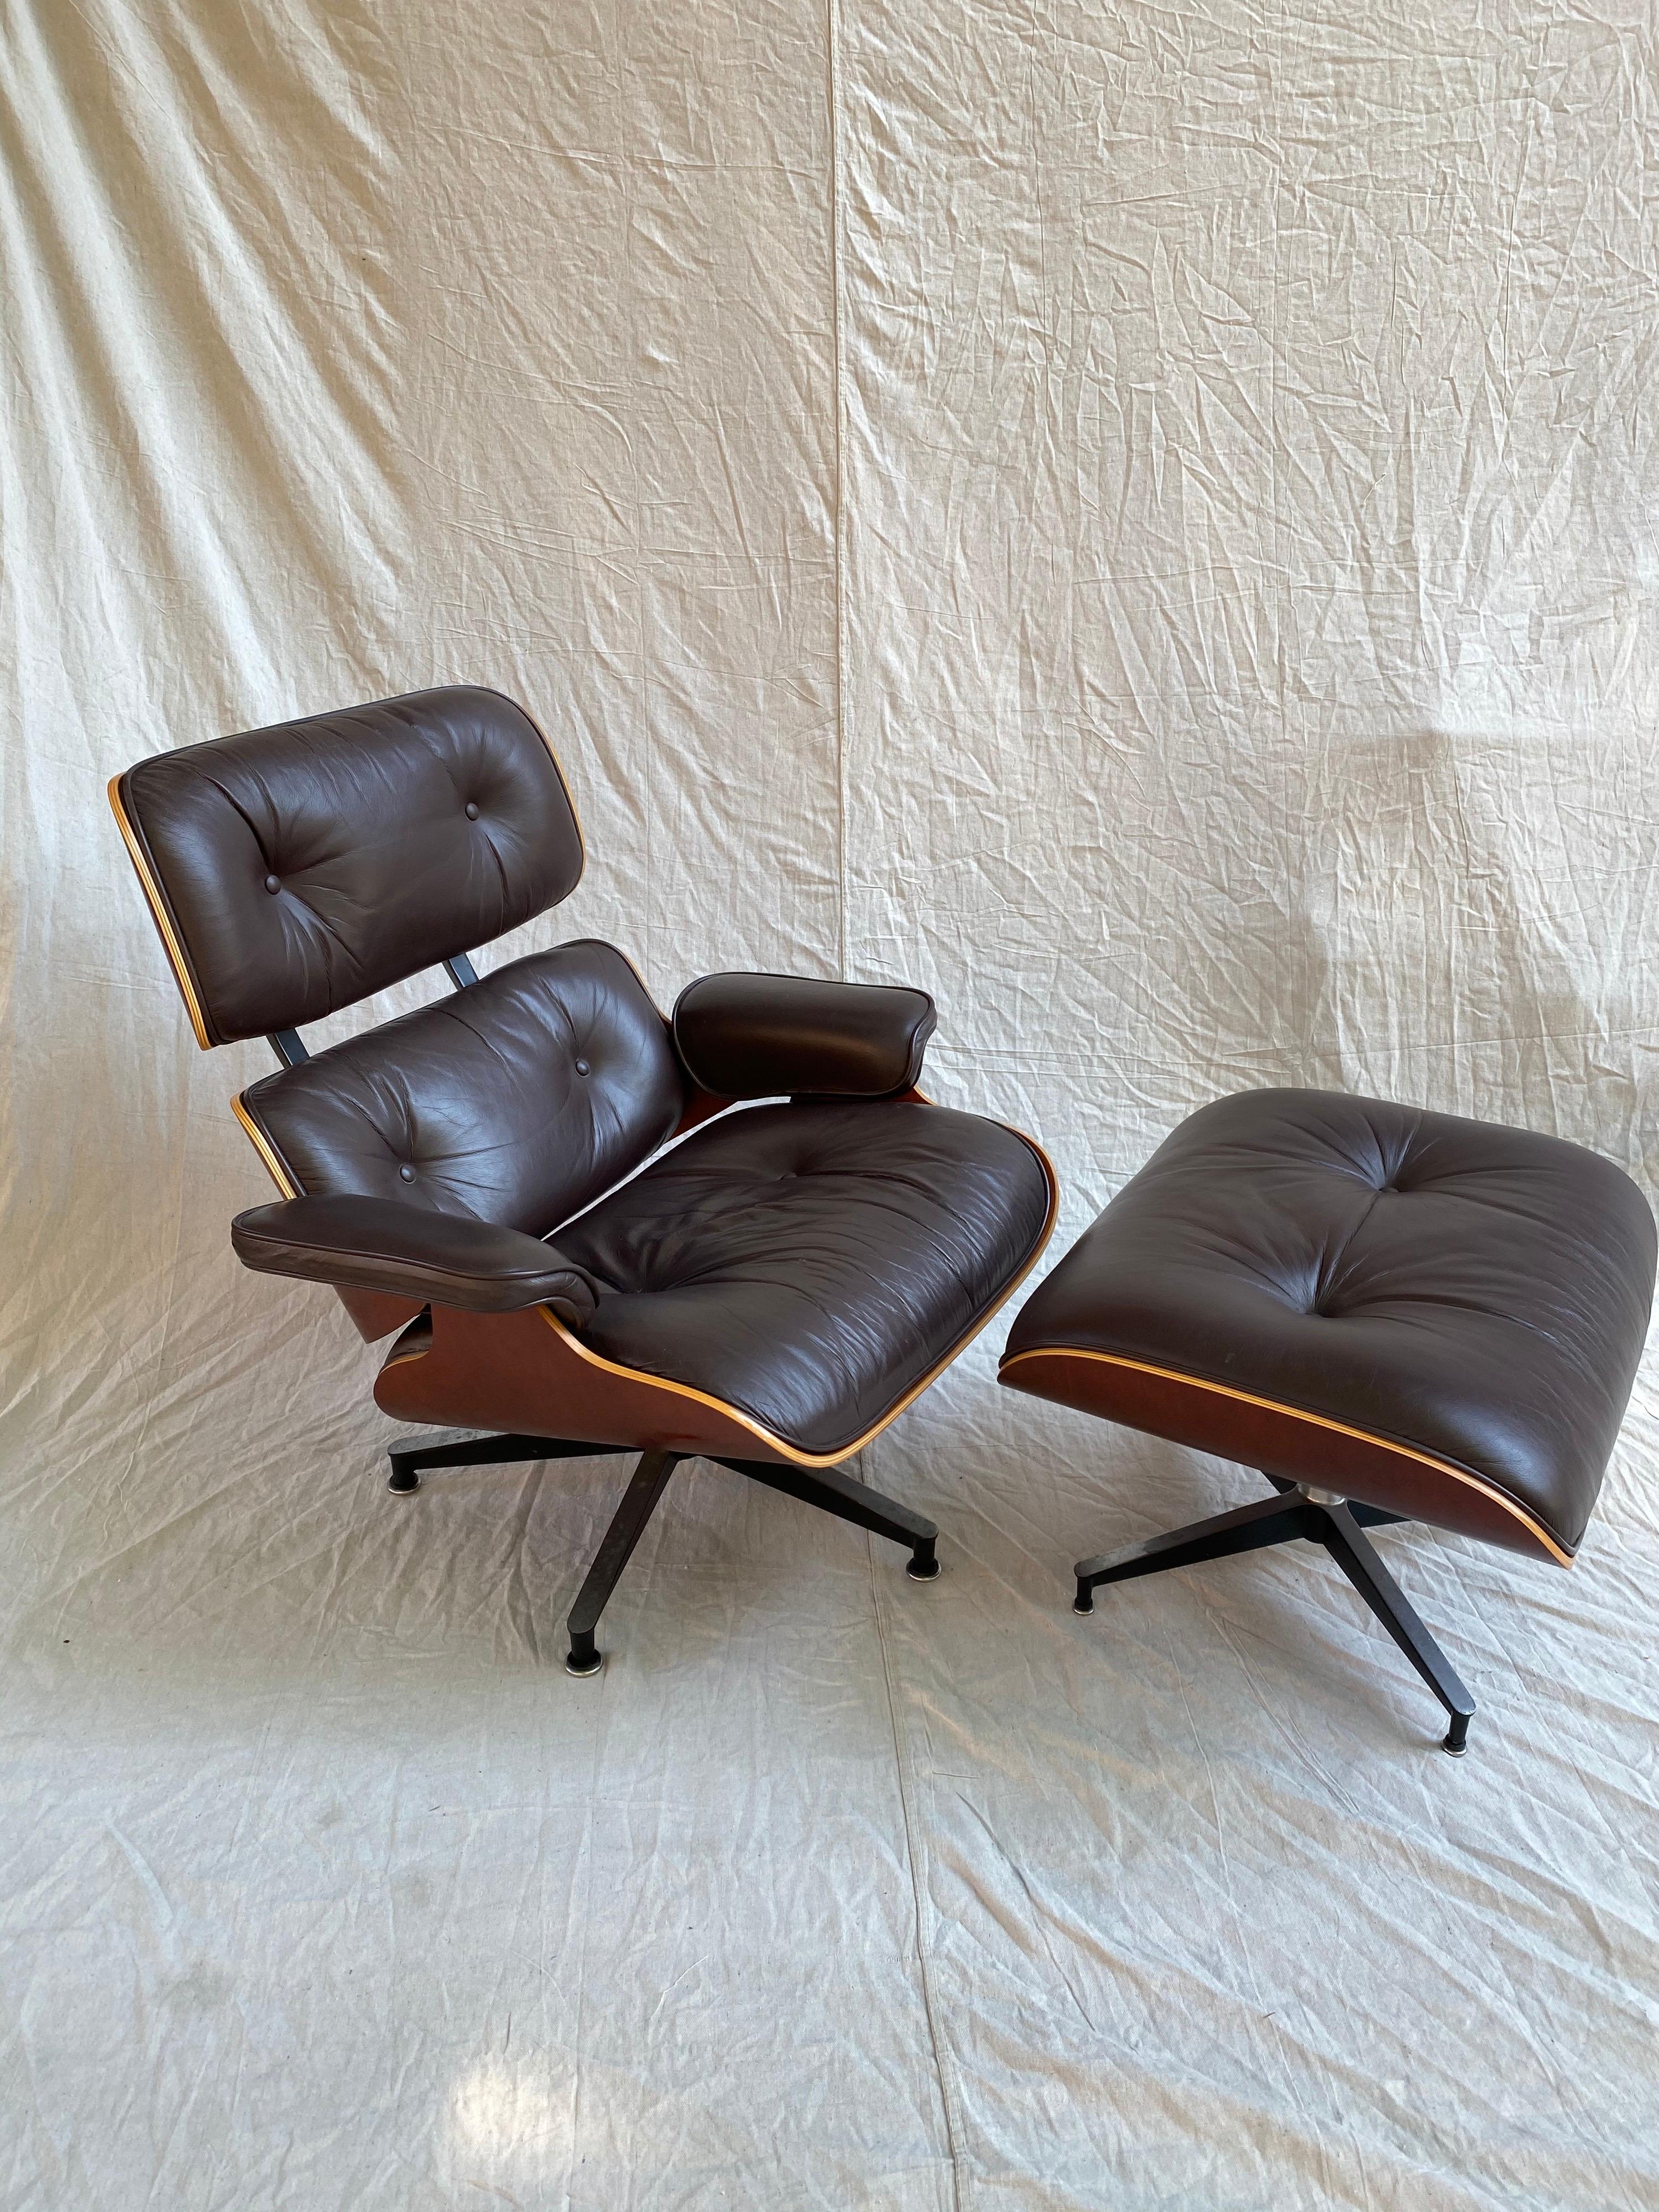 Classic Eames Design for Herman Miller! Cherry Outer shell, this chair dates to the mid-1990s. Cherry is in very good condition, showing no major wear. Leather is a deep wine or maroon. Shows minor patina to arms, but overall leather presents very